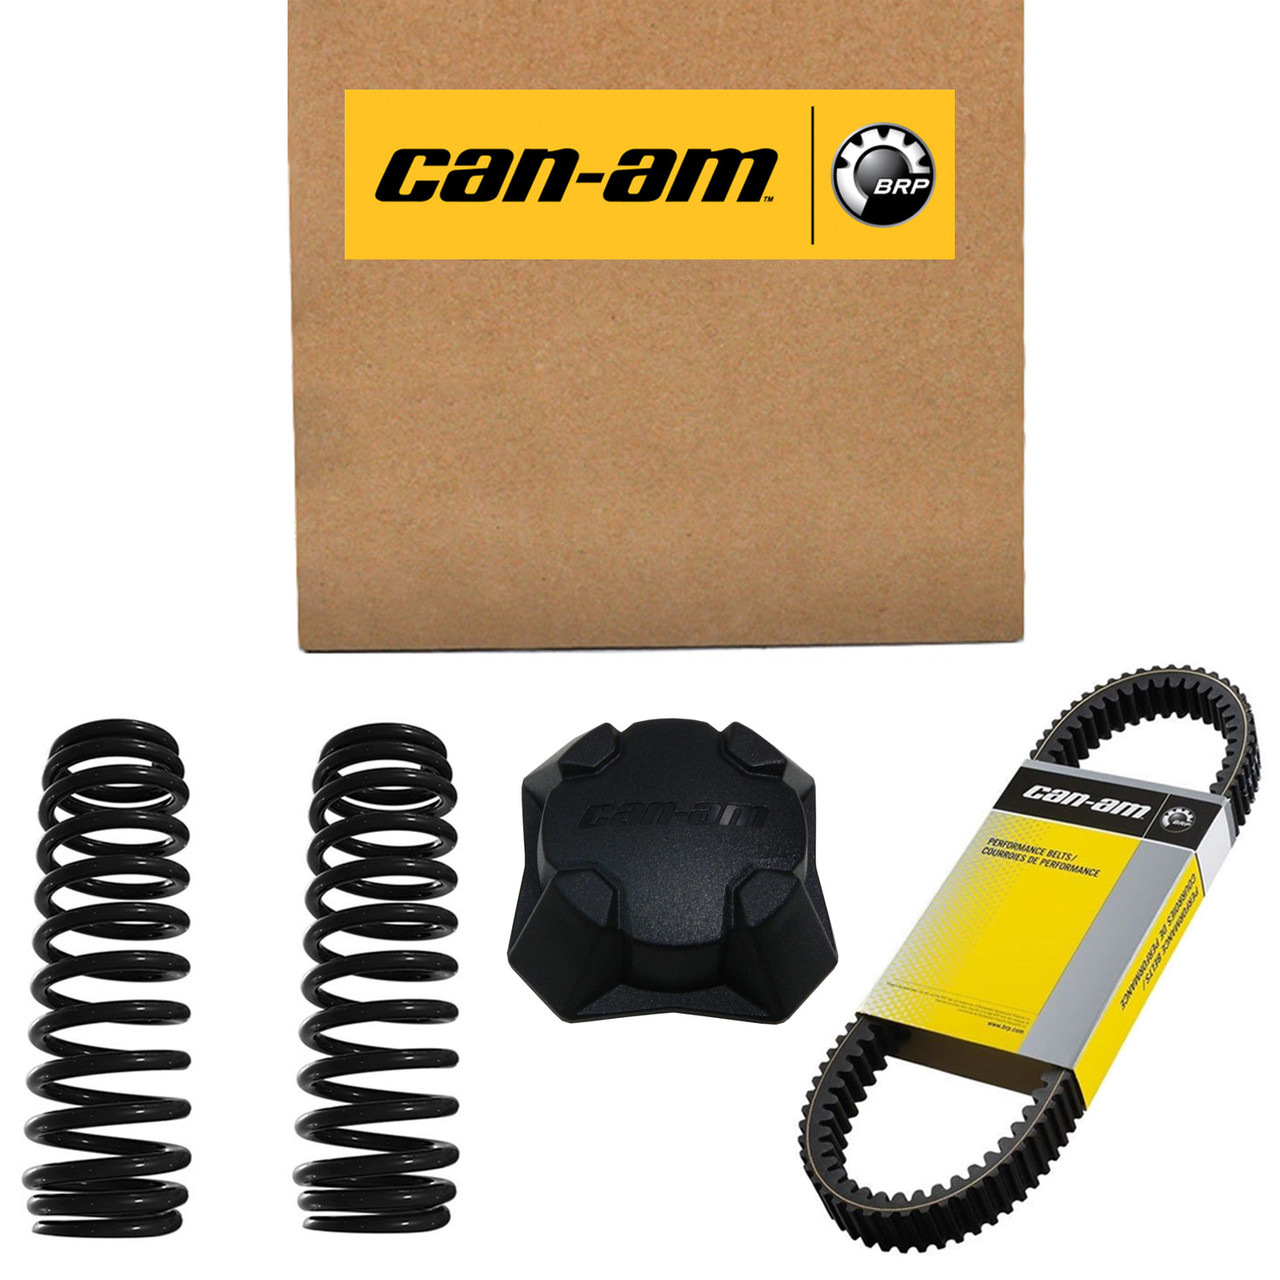 Can-Am New OEM Electronic Box, 420666457